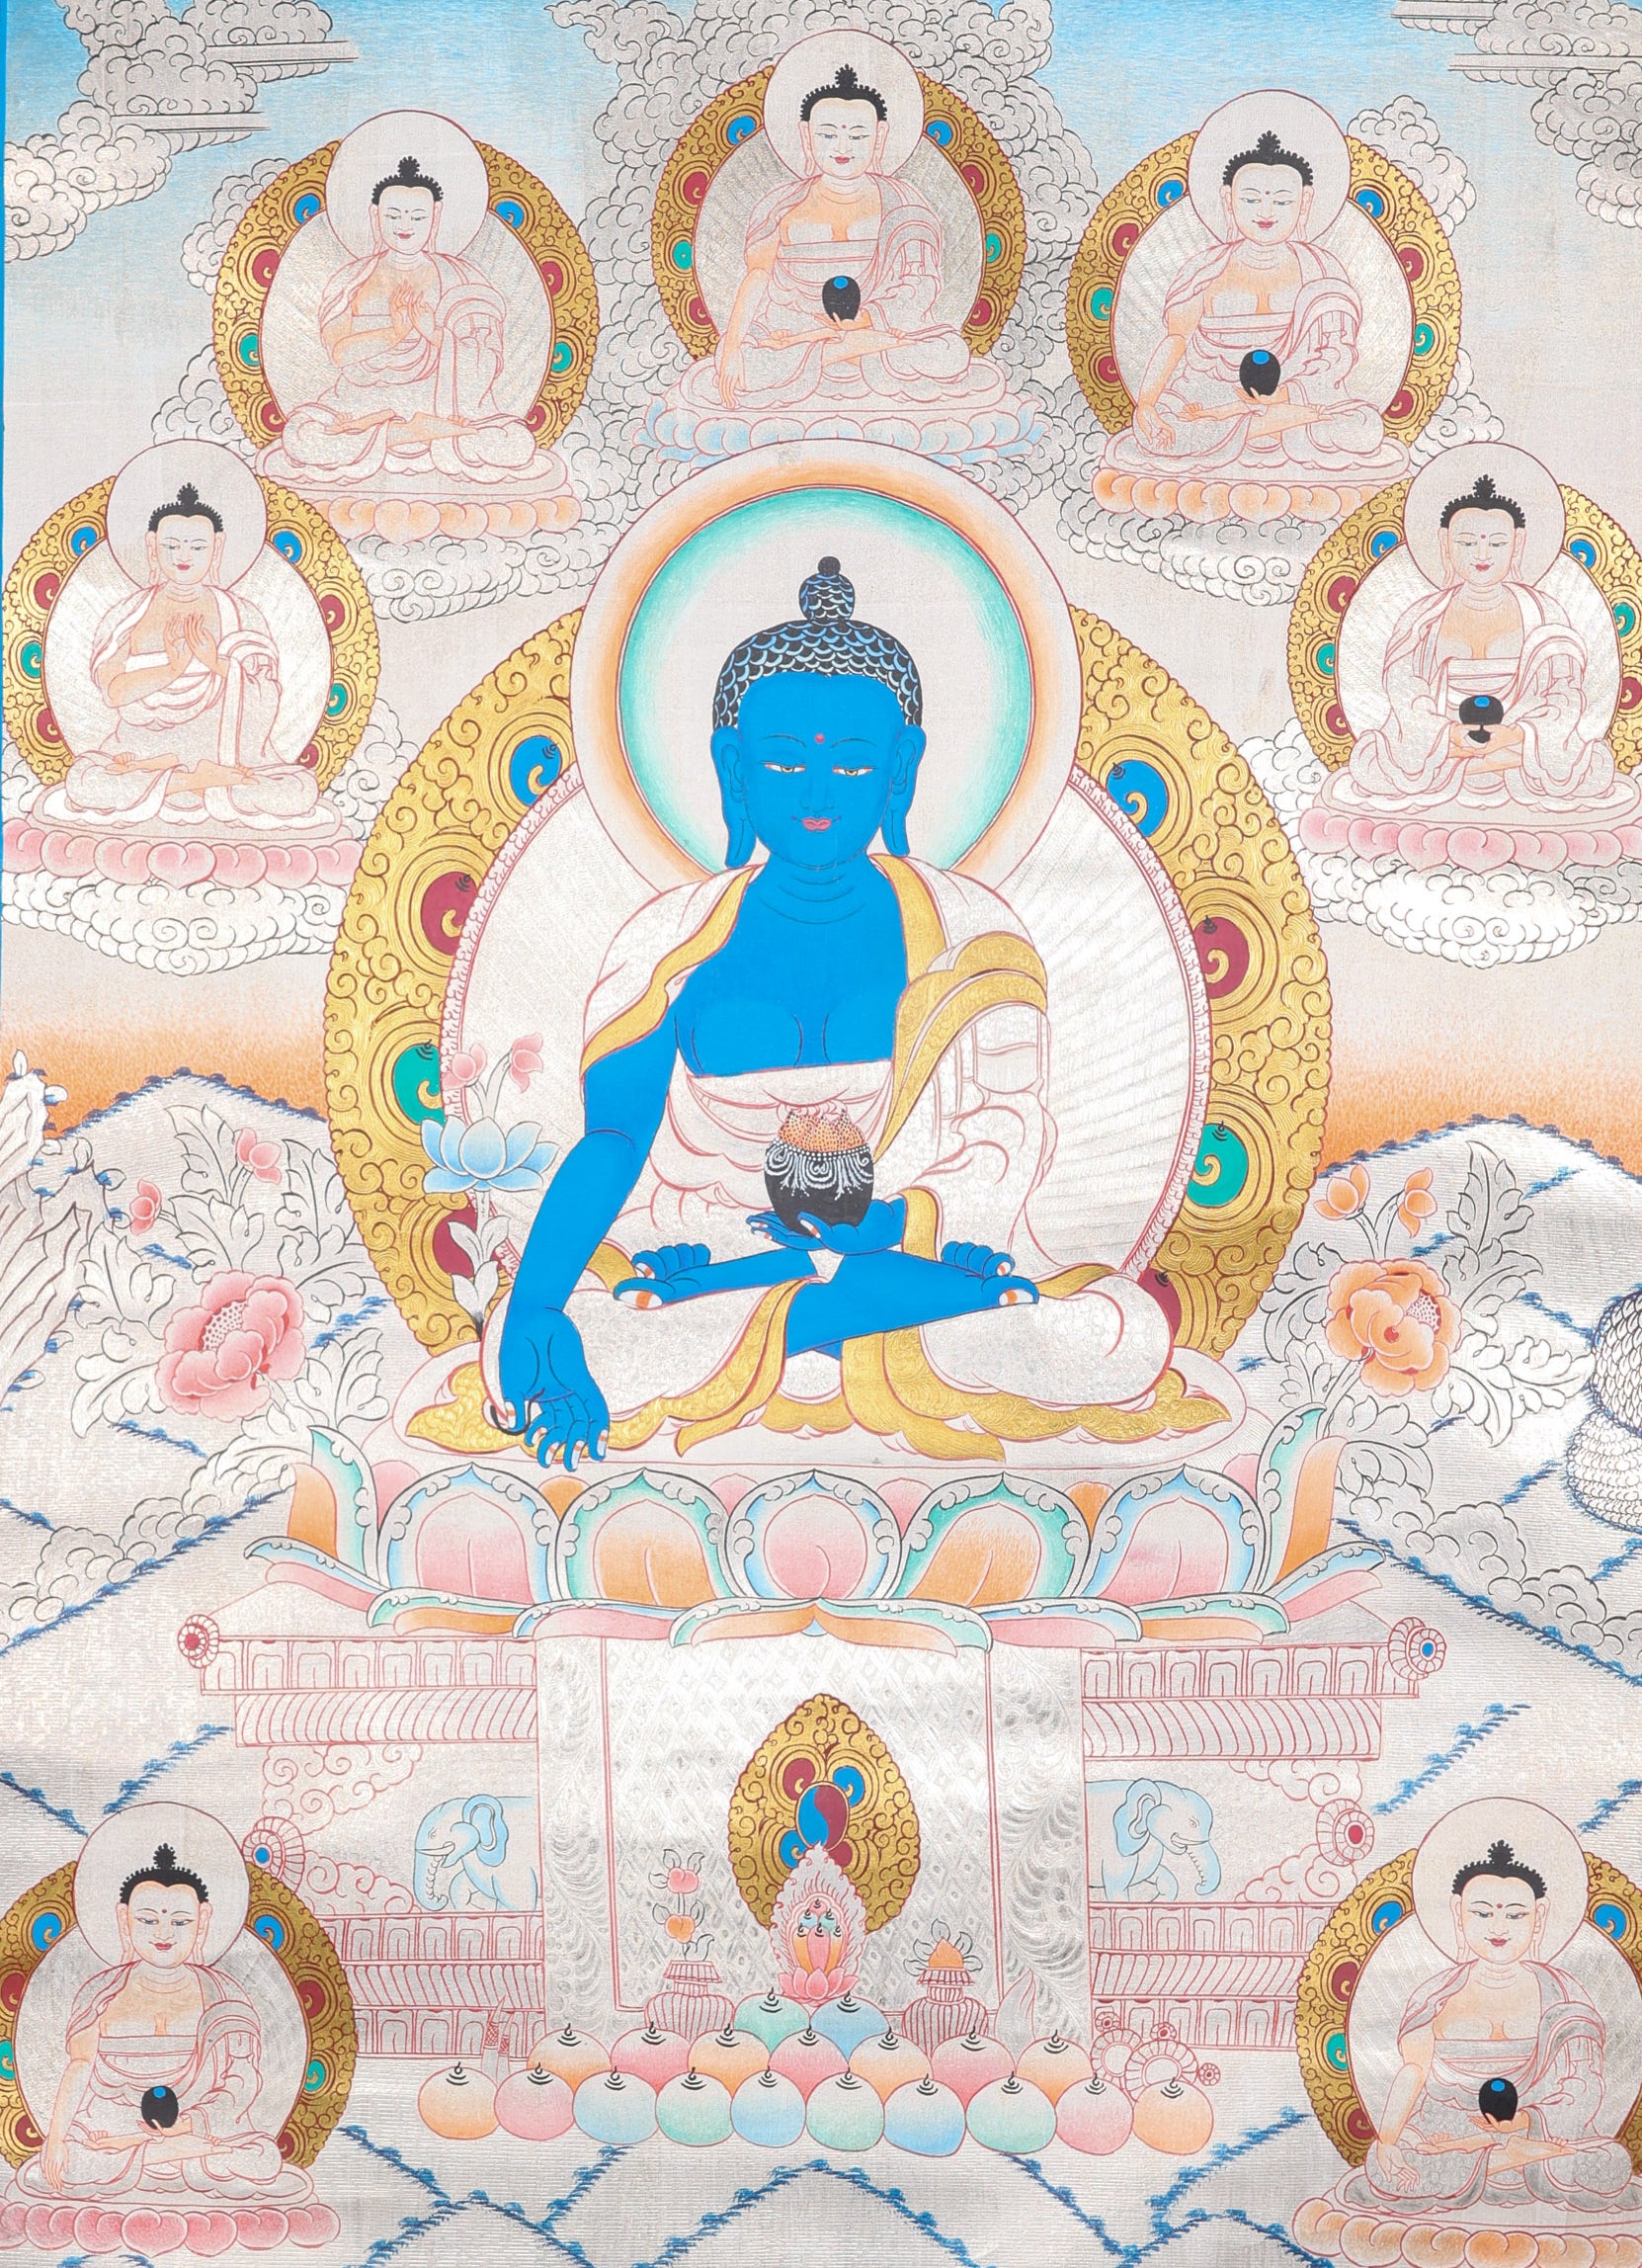 Medicine Buddha Thangka Painting for physical and spiritual well-being.